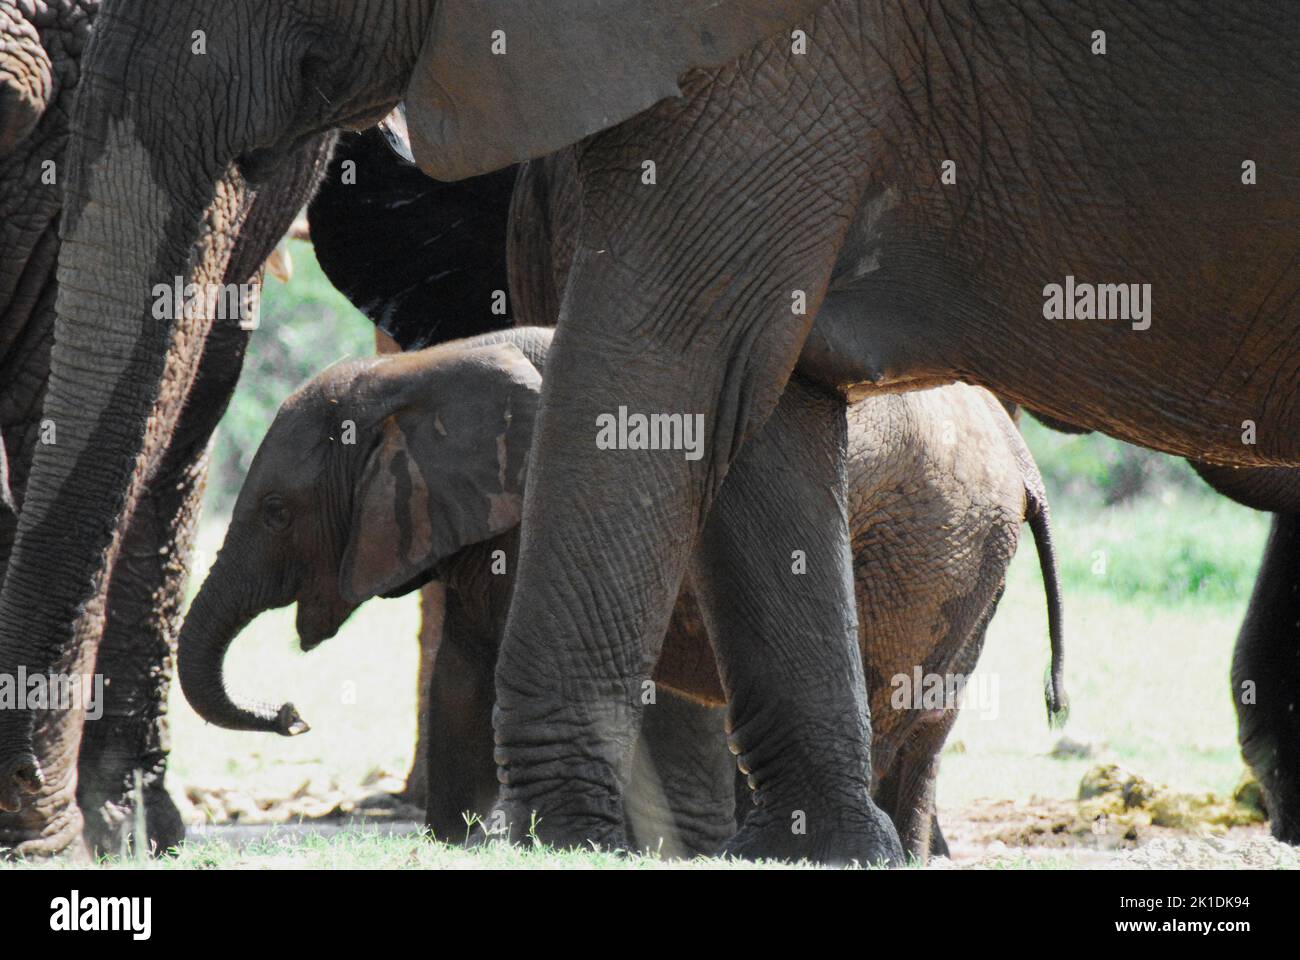 Africa- Close up of a family of wild elephants with a young calf walking between their legs. Shot on safari in South Africa. Stock Photo